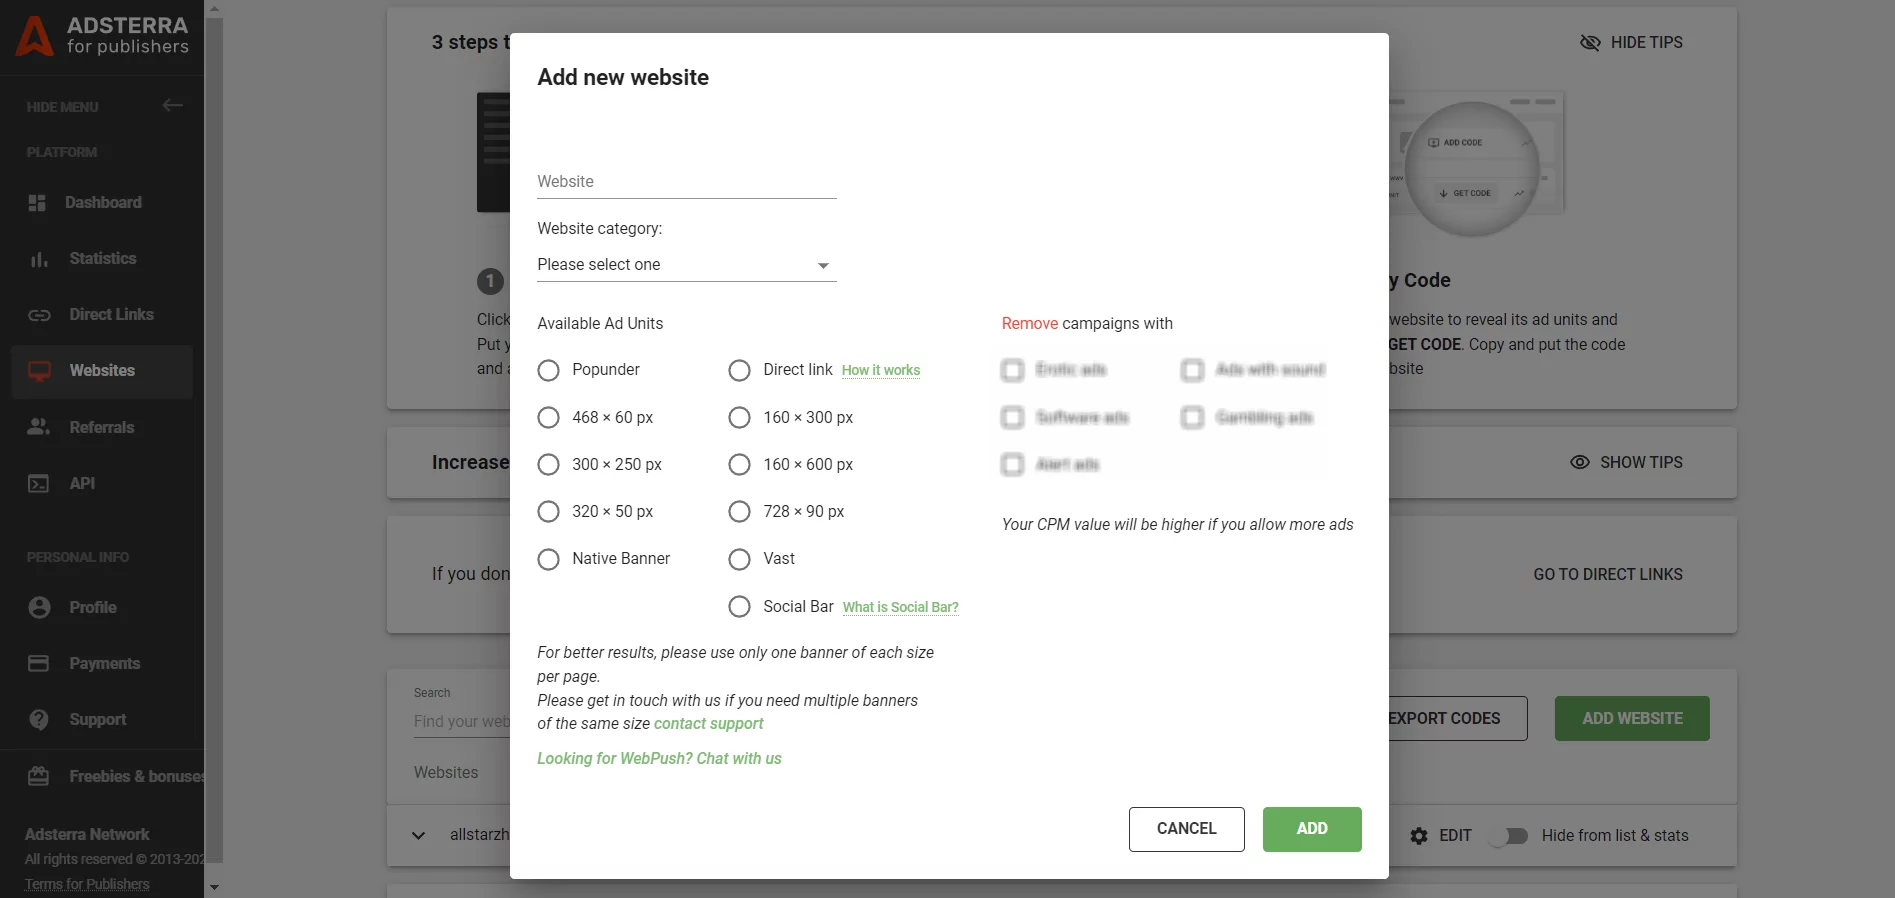 How to add a website to Adsterra